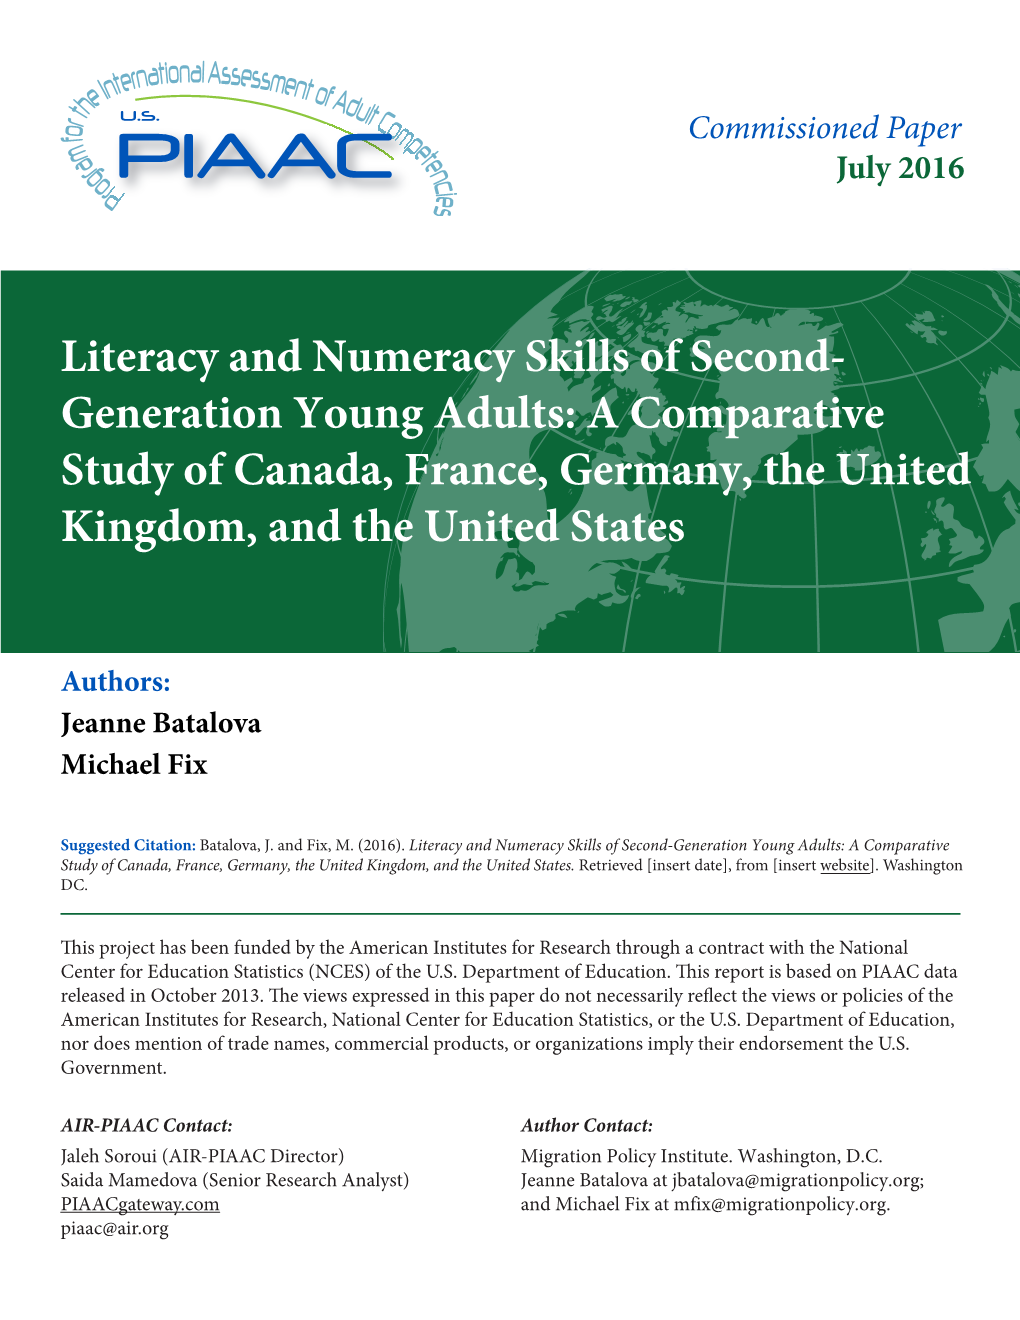 Literacy and Numeracy Skills of Second- Generation Young Adults: a Comparative Study of Canada, France, Germany, the United Kingdom, and the United States